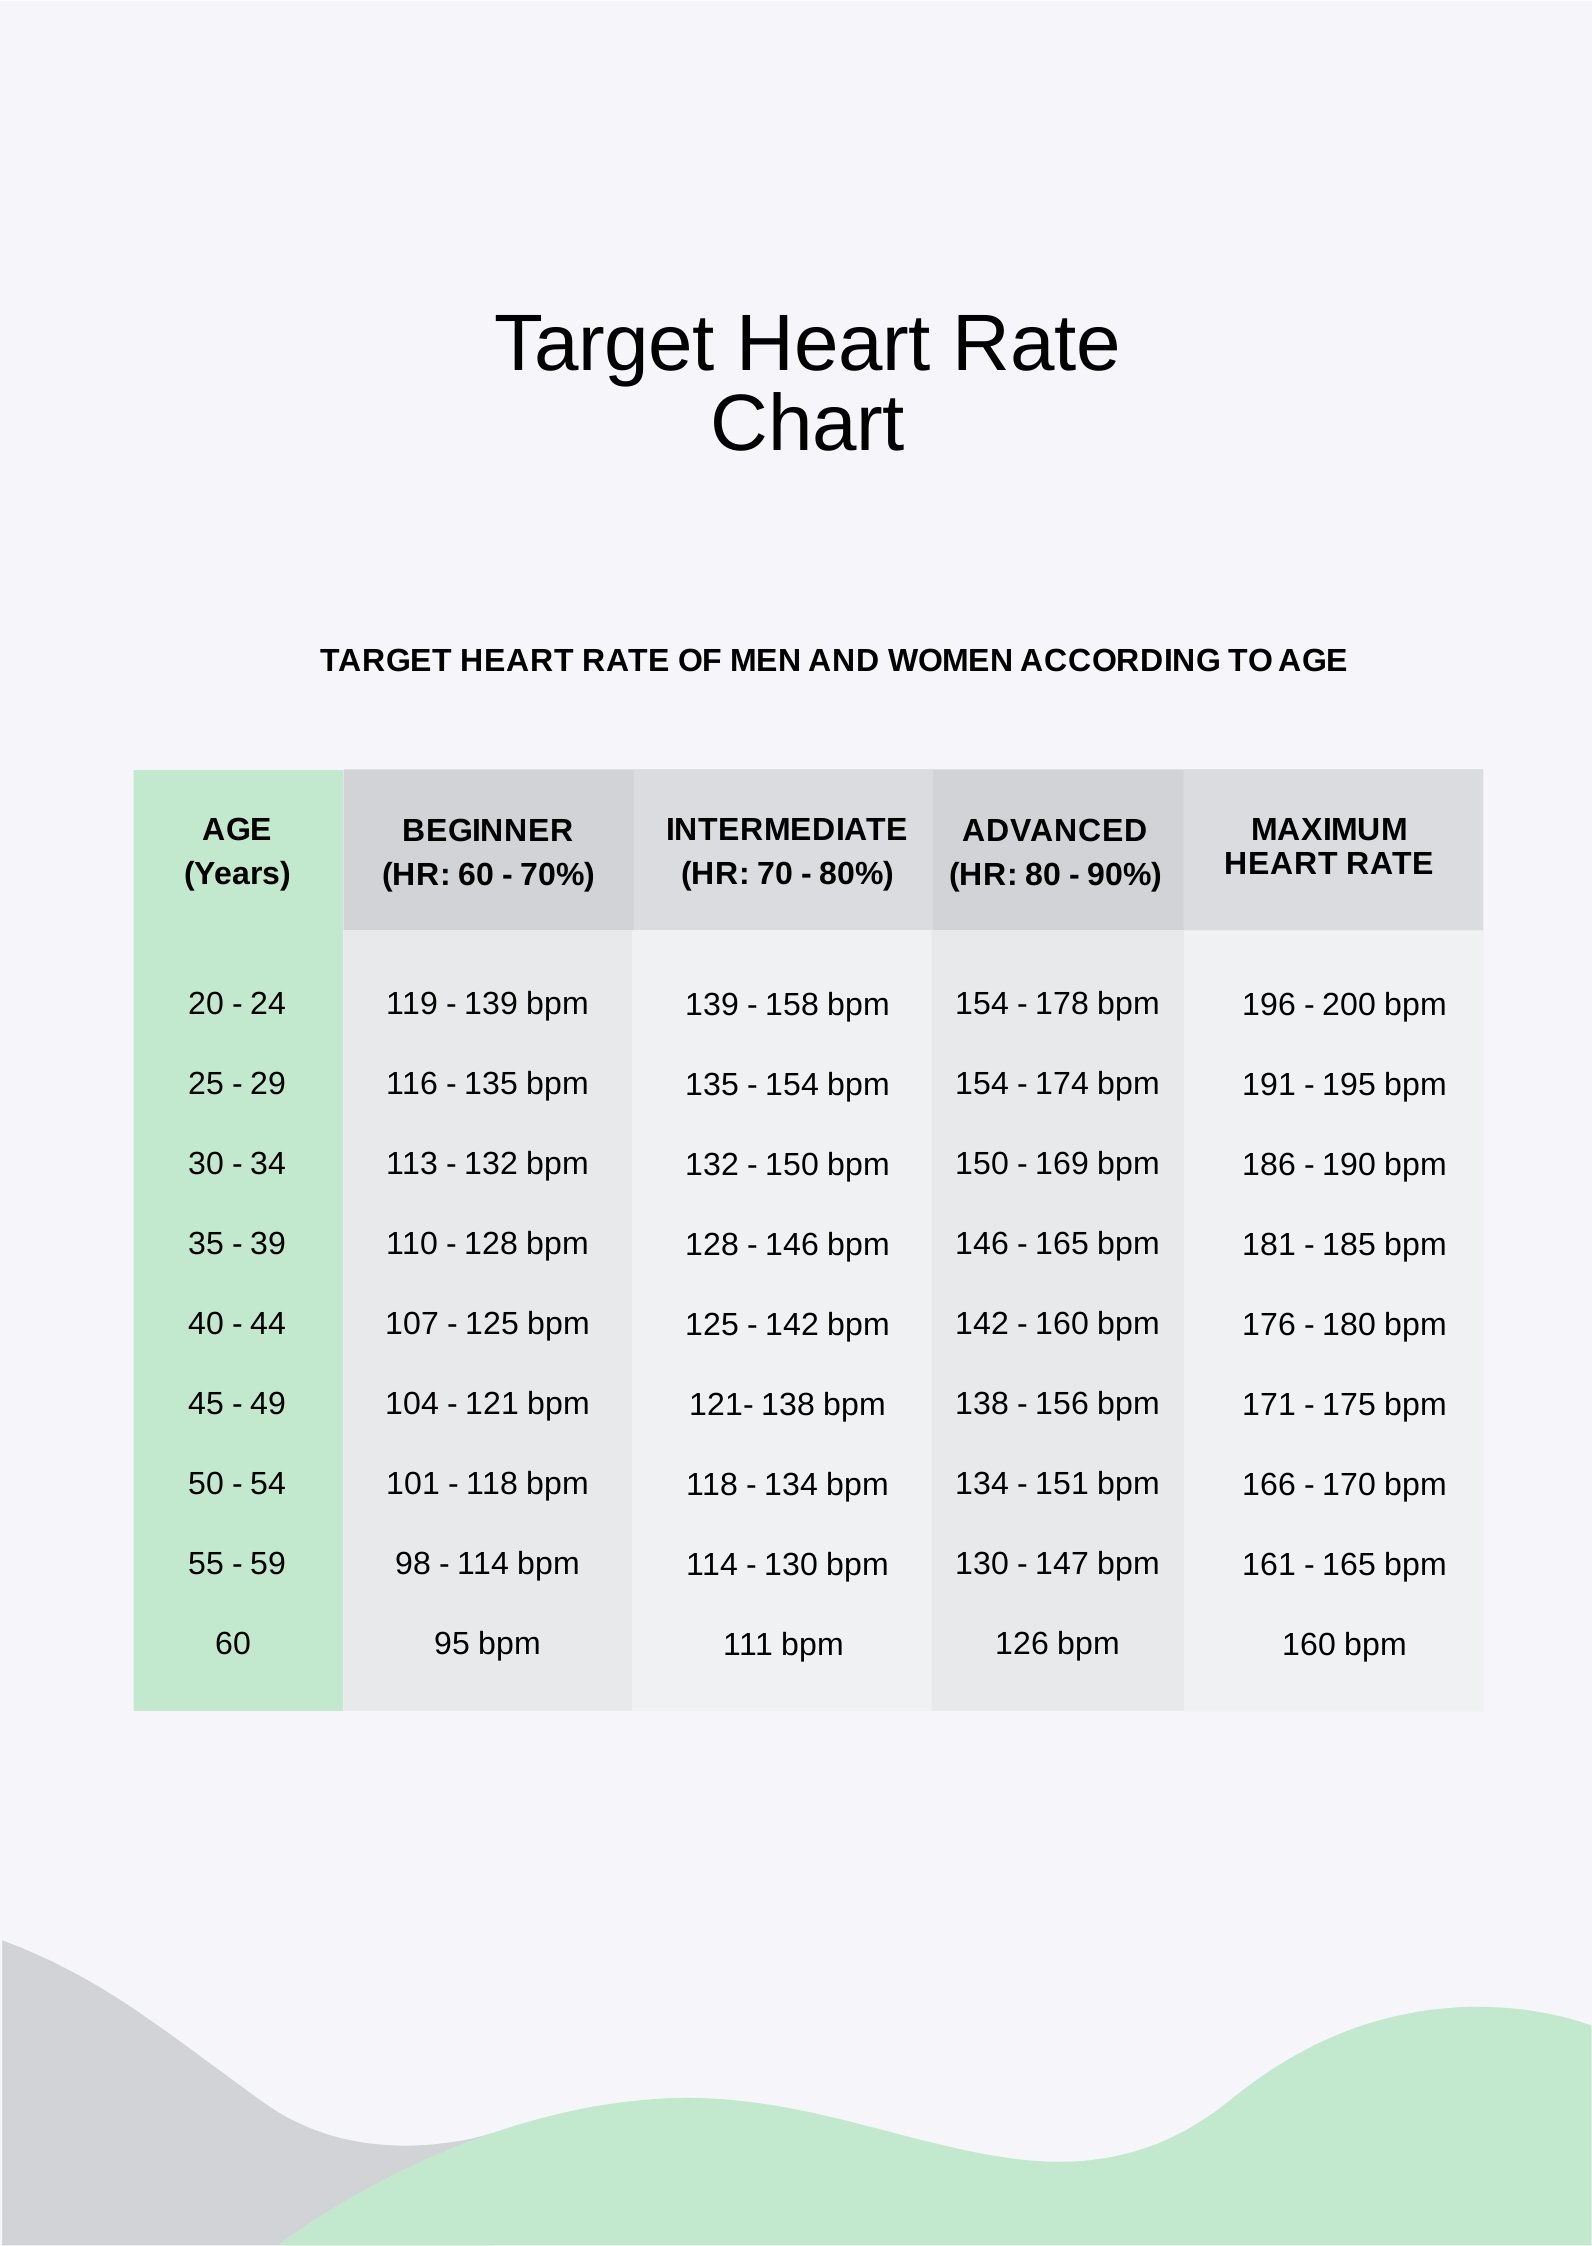 Target Heart Rate Chart